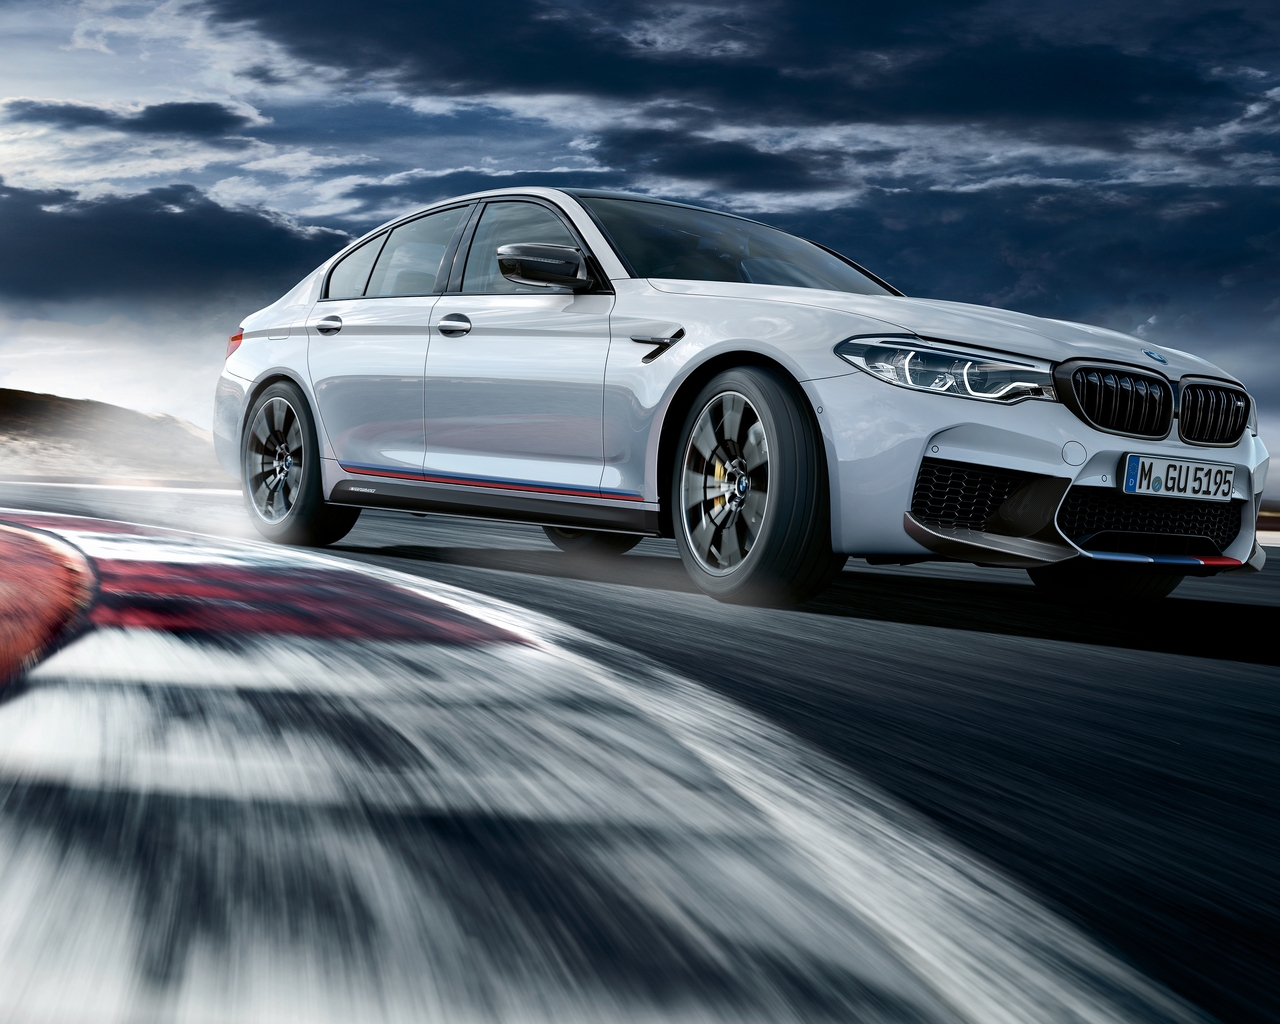 Image: Race track, car, speed, traffic, in turn, BMW, M5, clouds